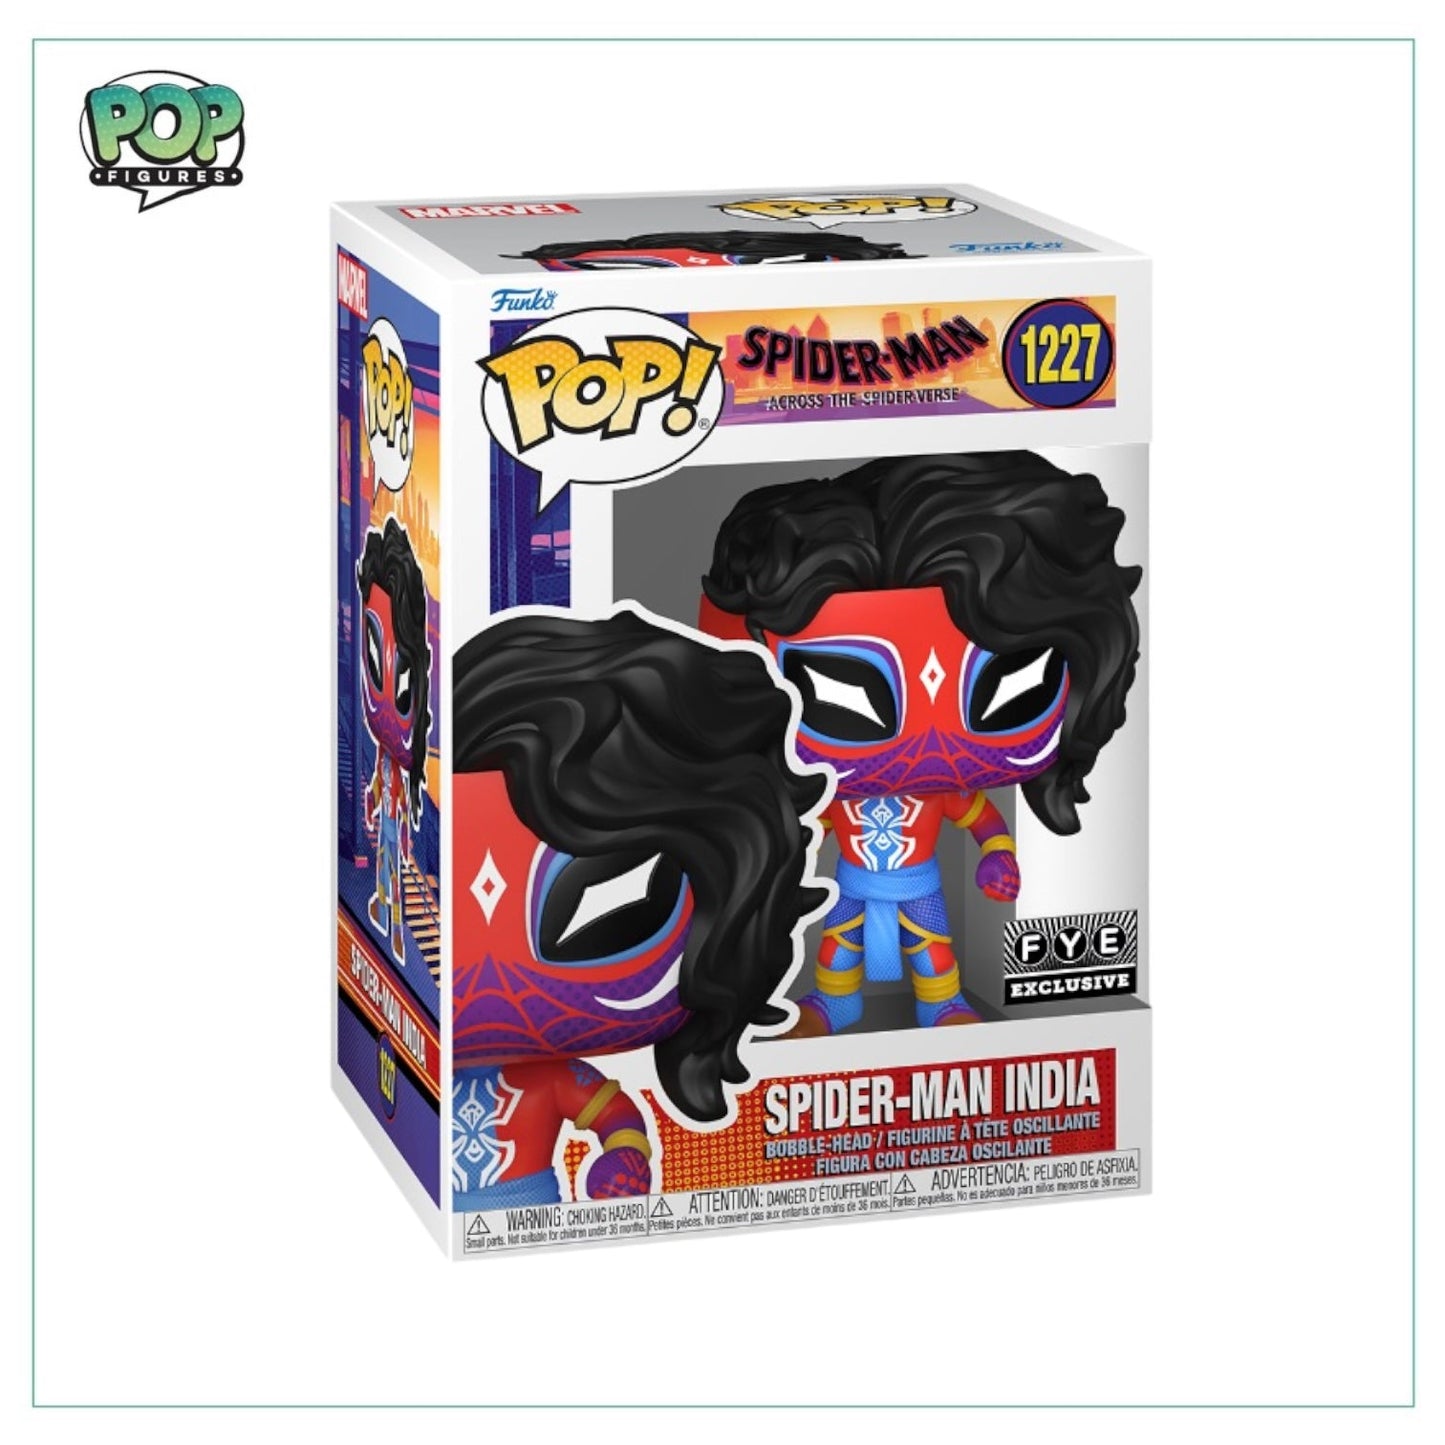 Spider-Man India #1227 Funko Pop! - Spider-man Across the Spider-Verse - FYE Exclusive - Angry Cat